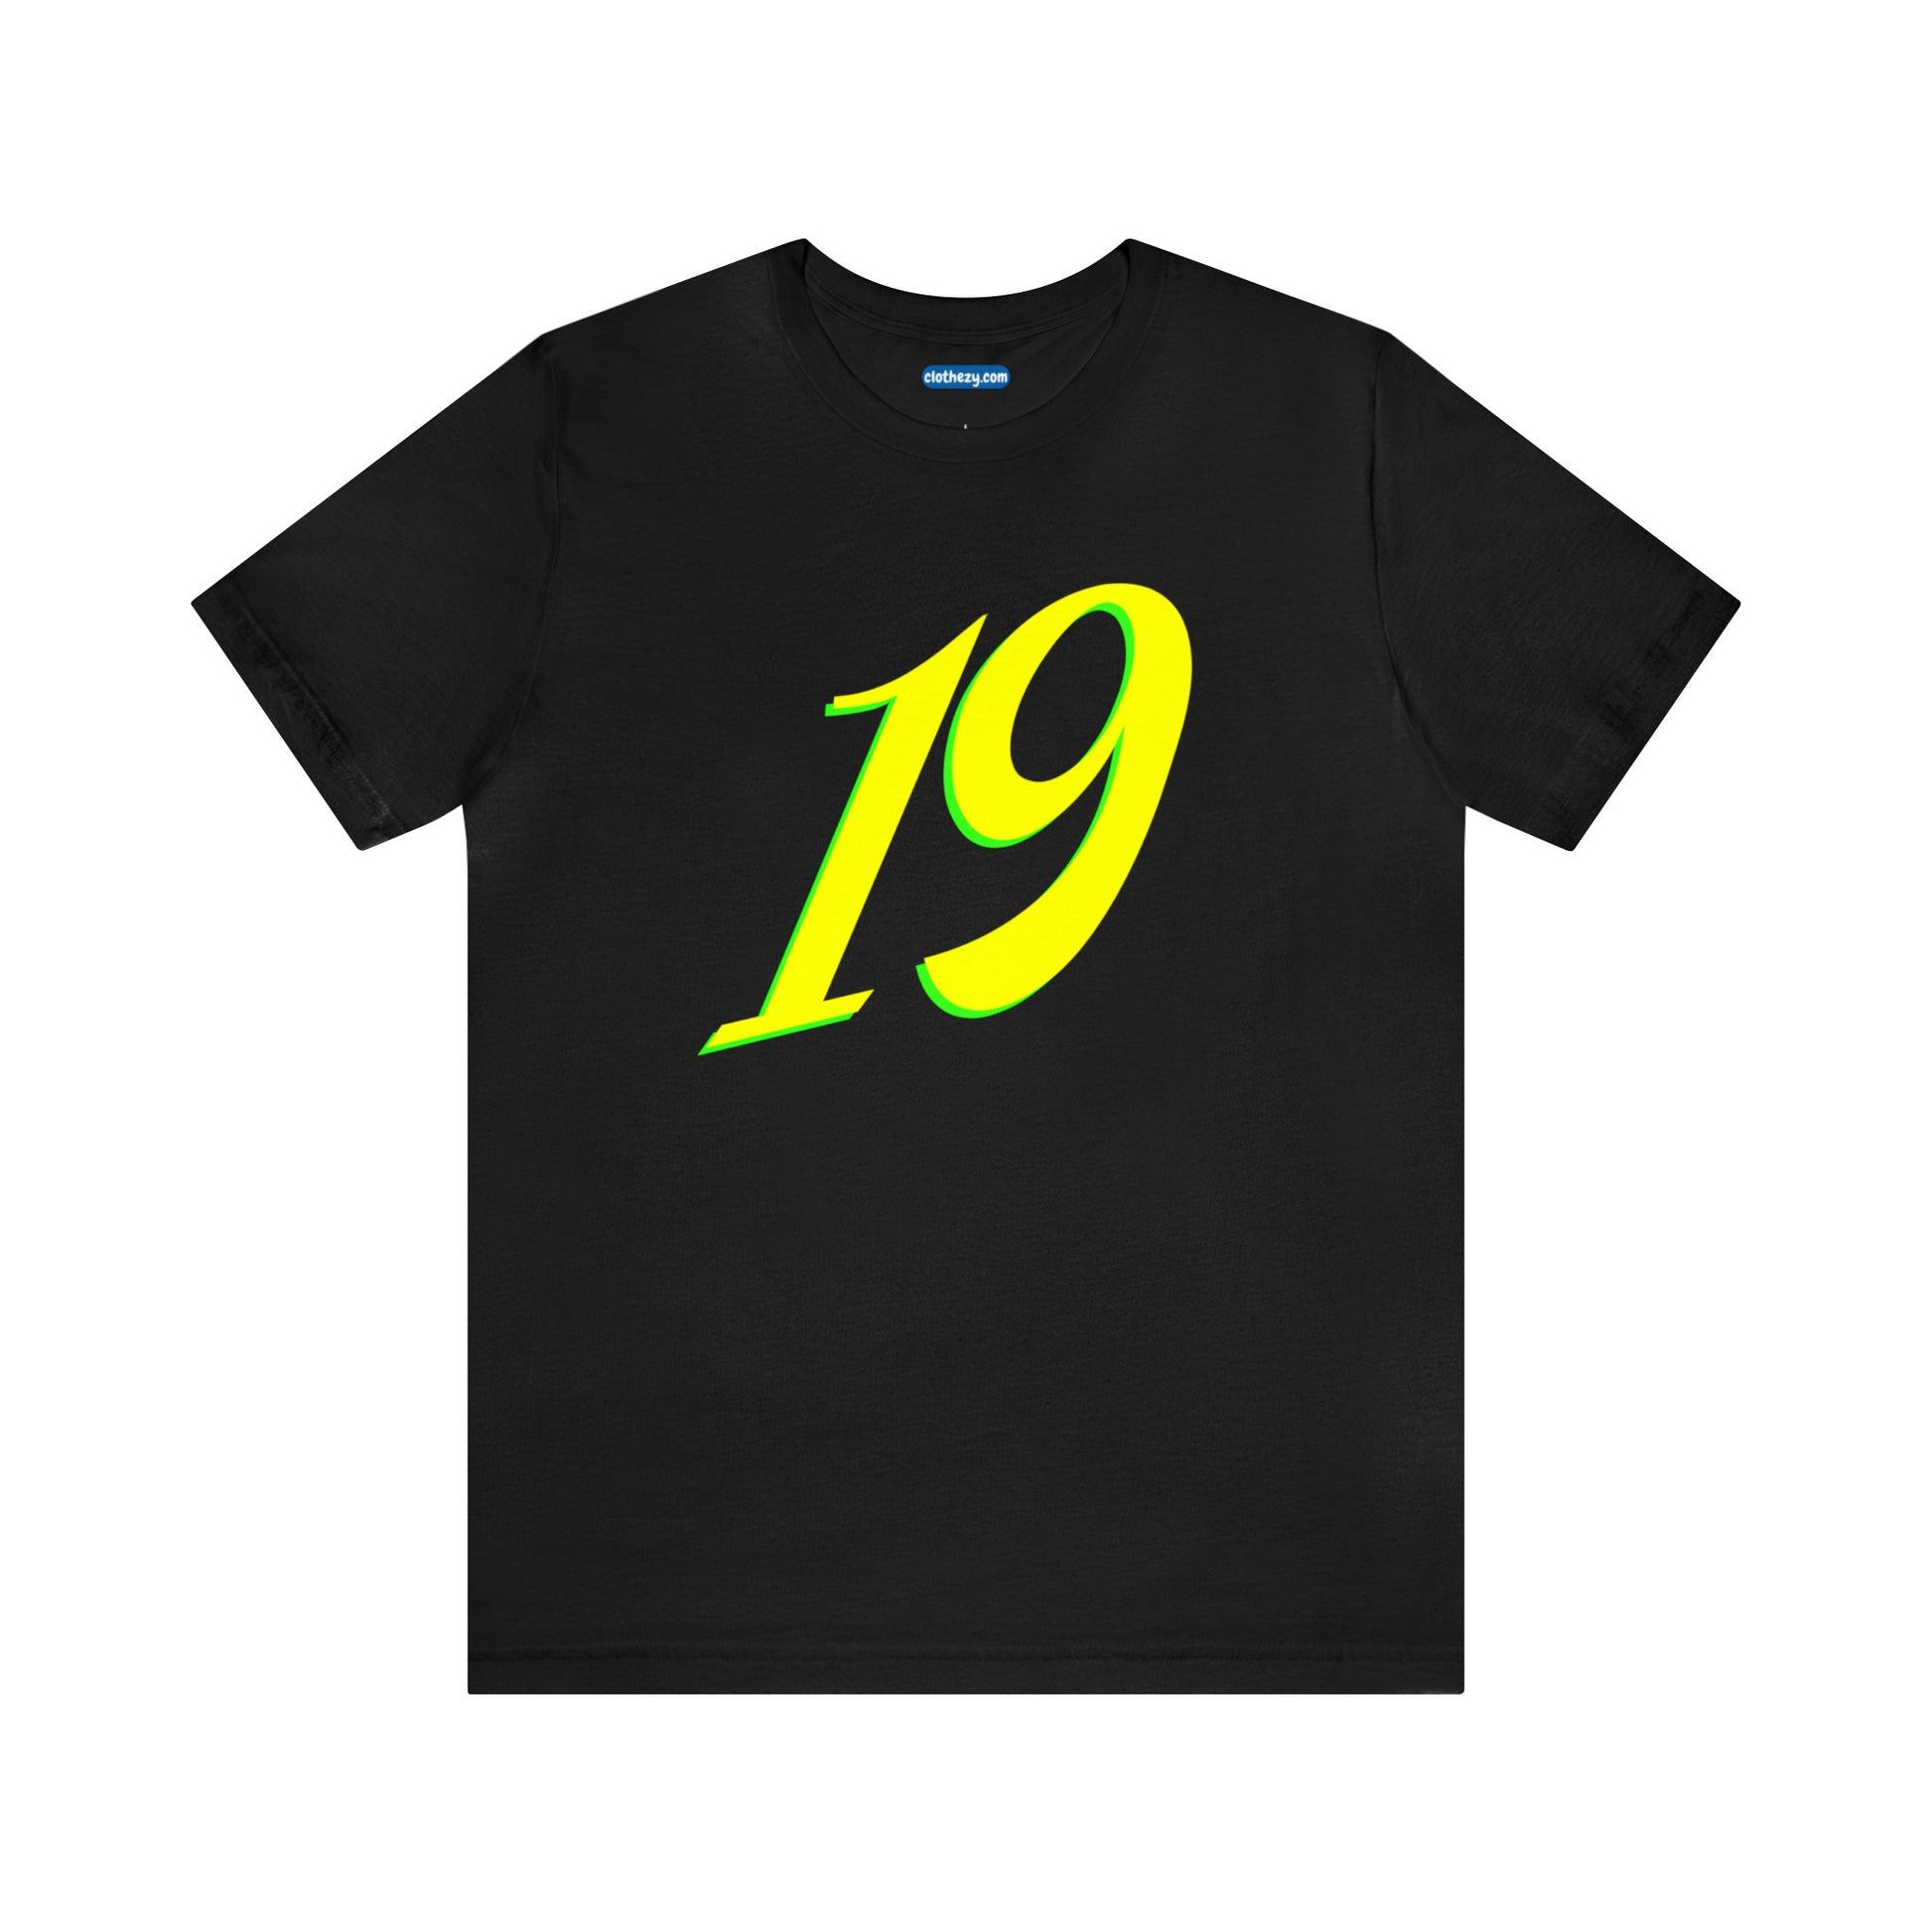 Number 19 Design - Soft Cotton Tee for birthdays and celebrations, Gift for friends and family, Multiple Options by clothezy.com in Dark Grey Heather Size Small - Buy Now